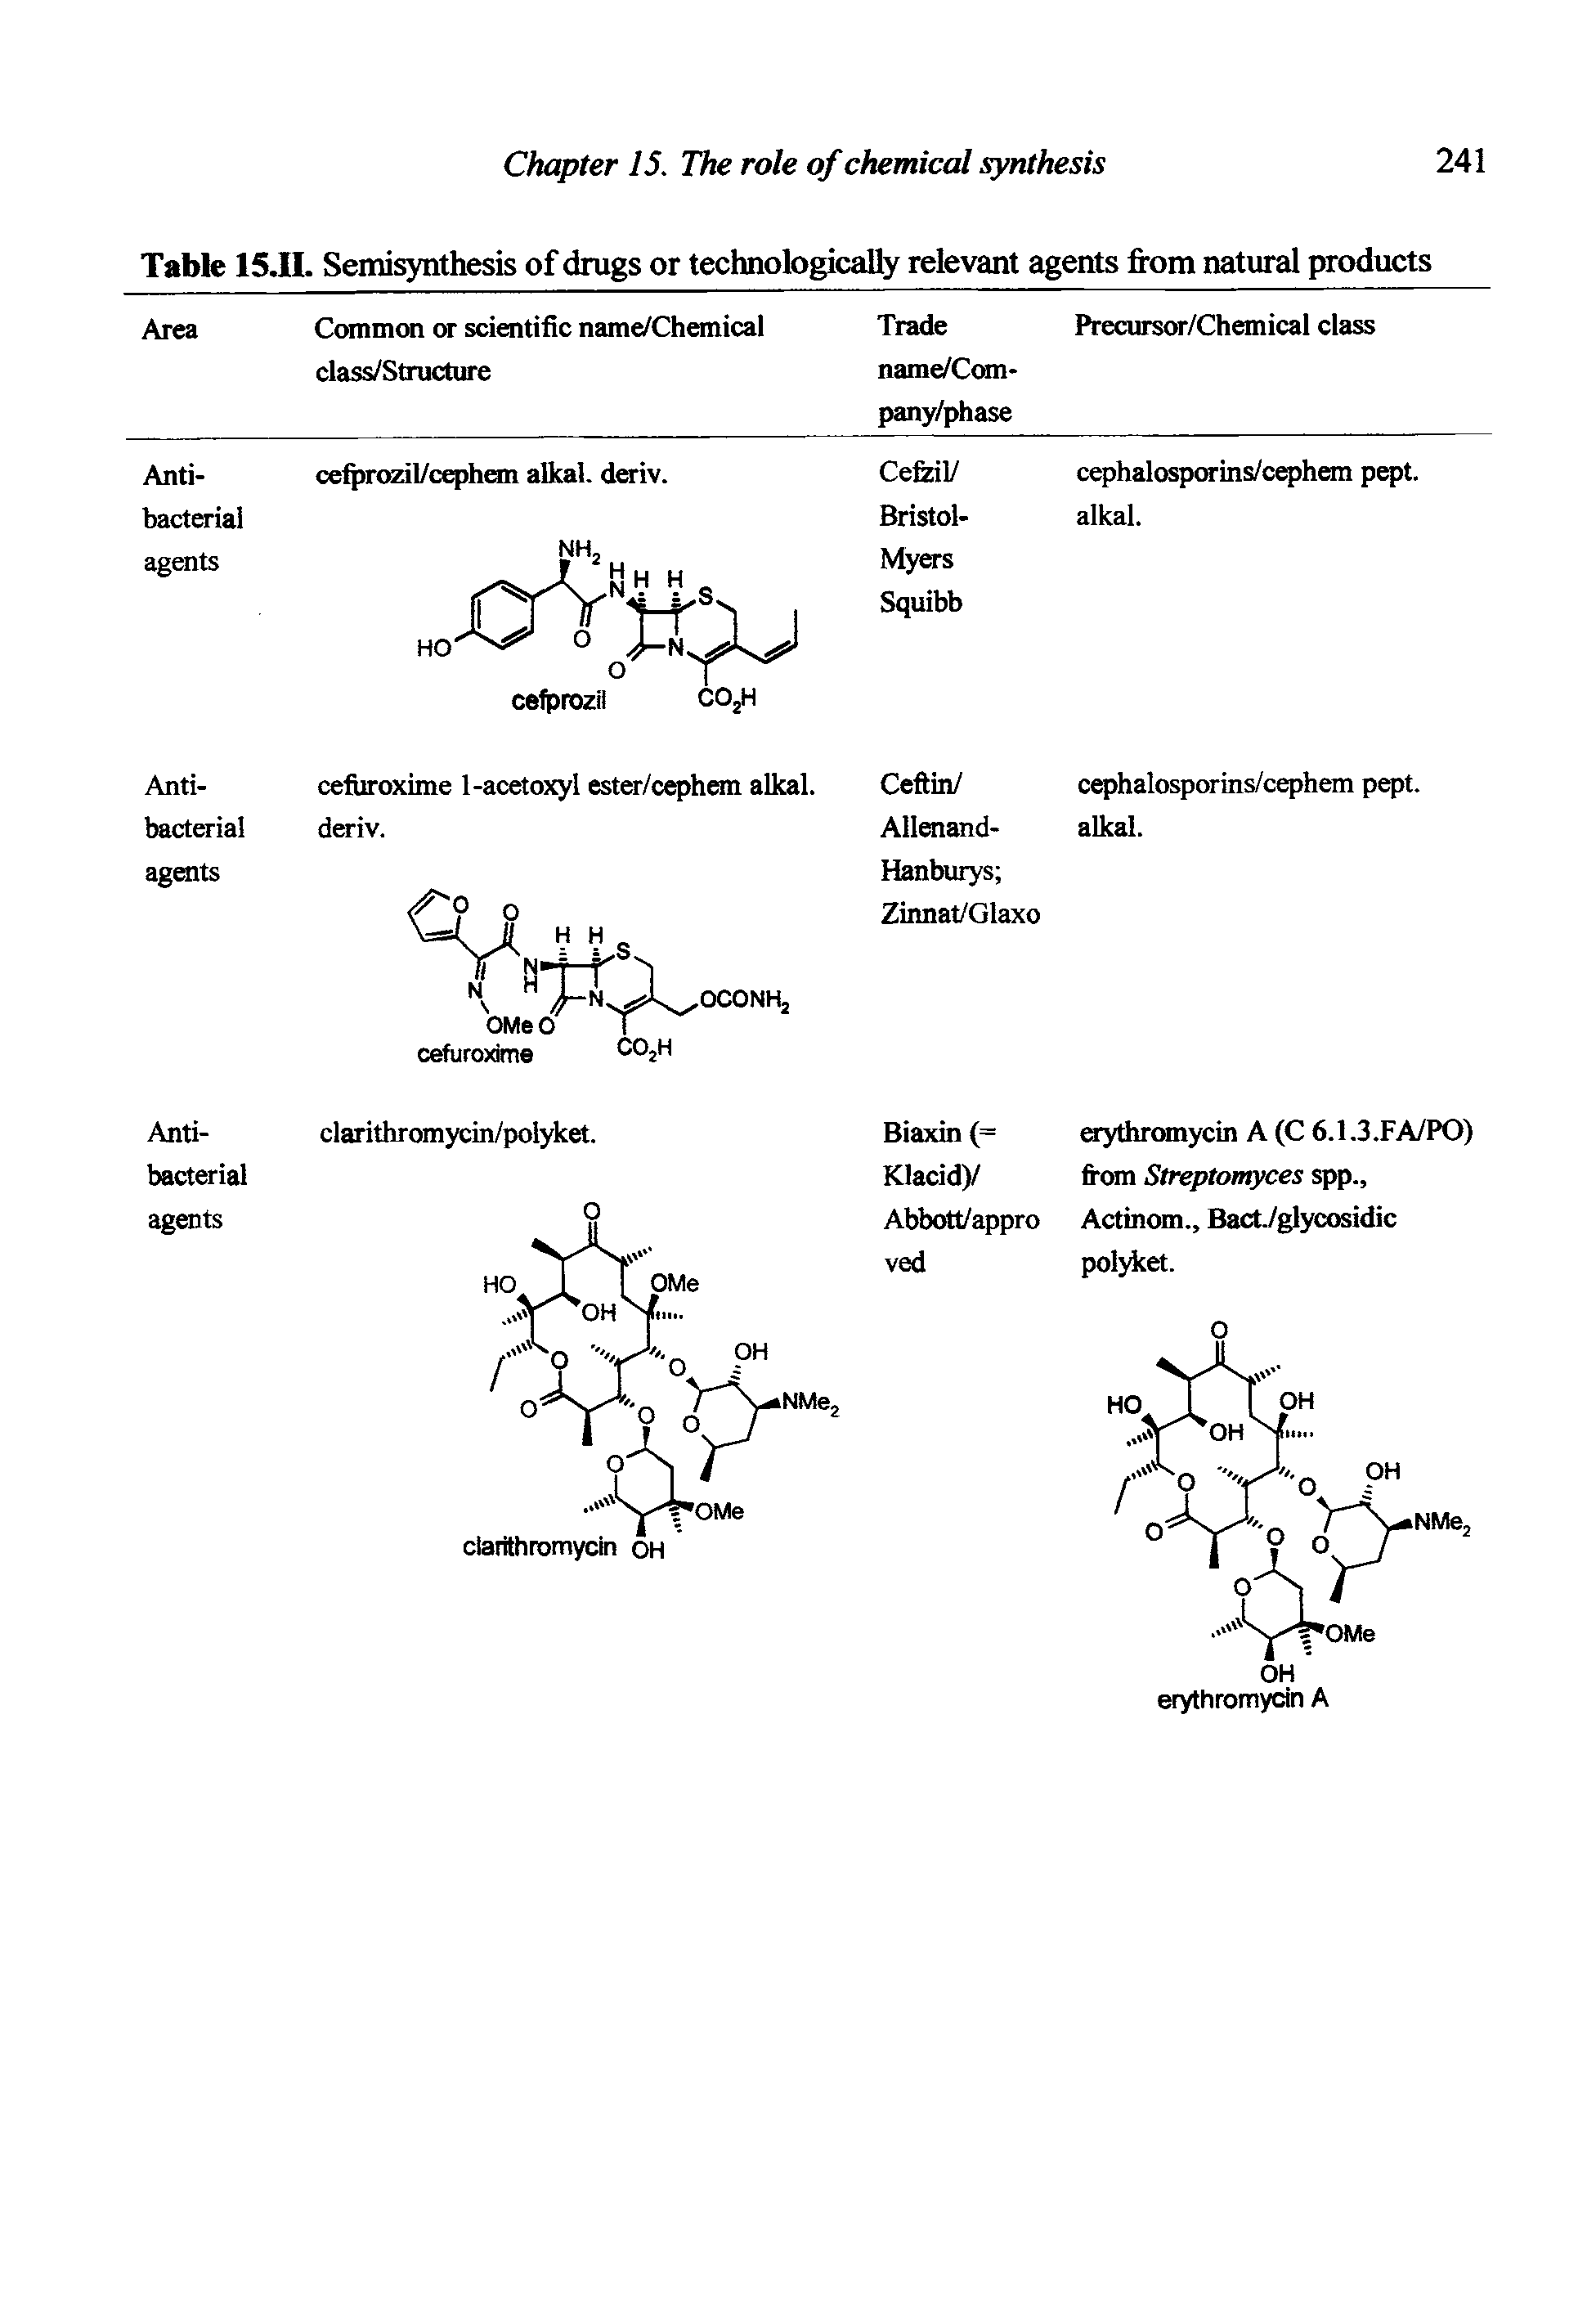 Table 15.IL Semisynthesis of drugs or technologically relevant agents from natural products...